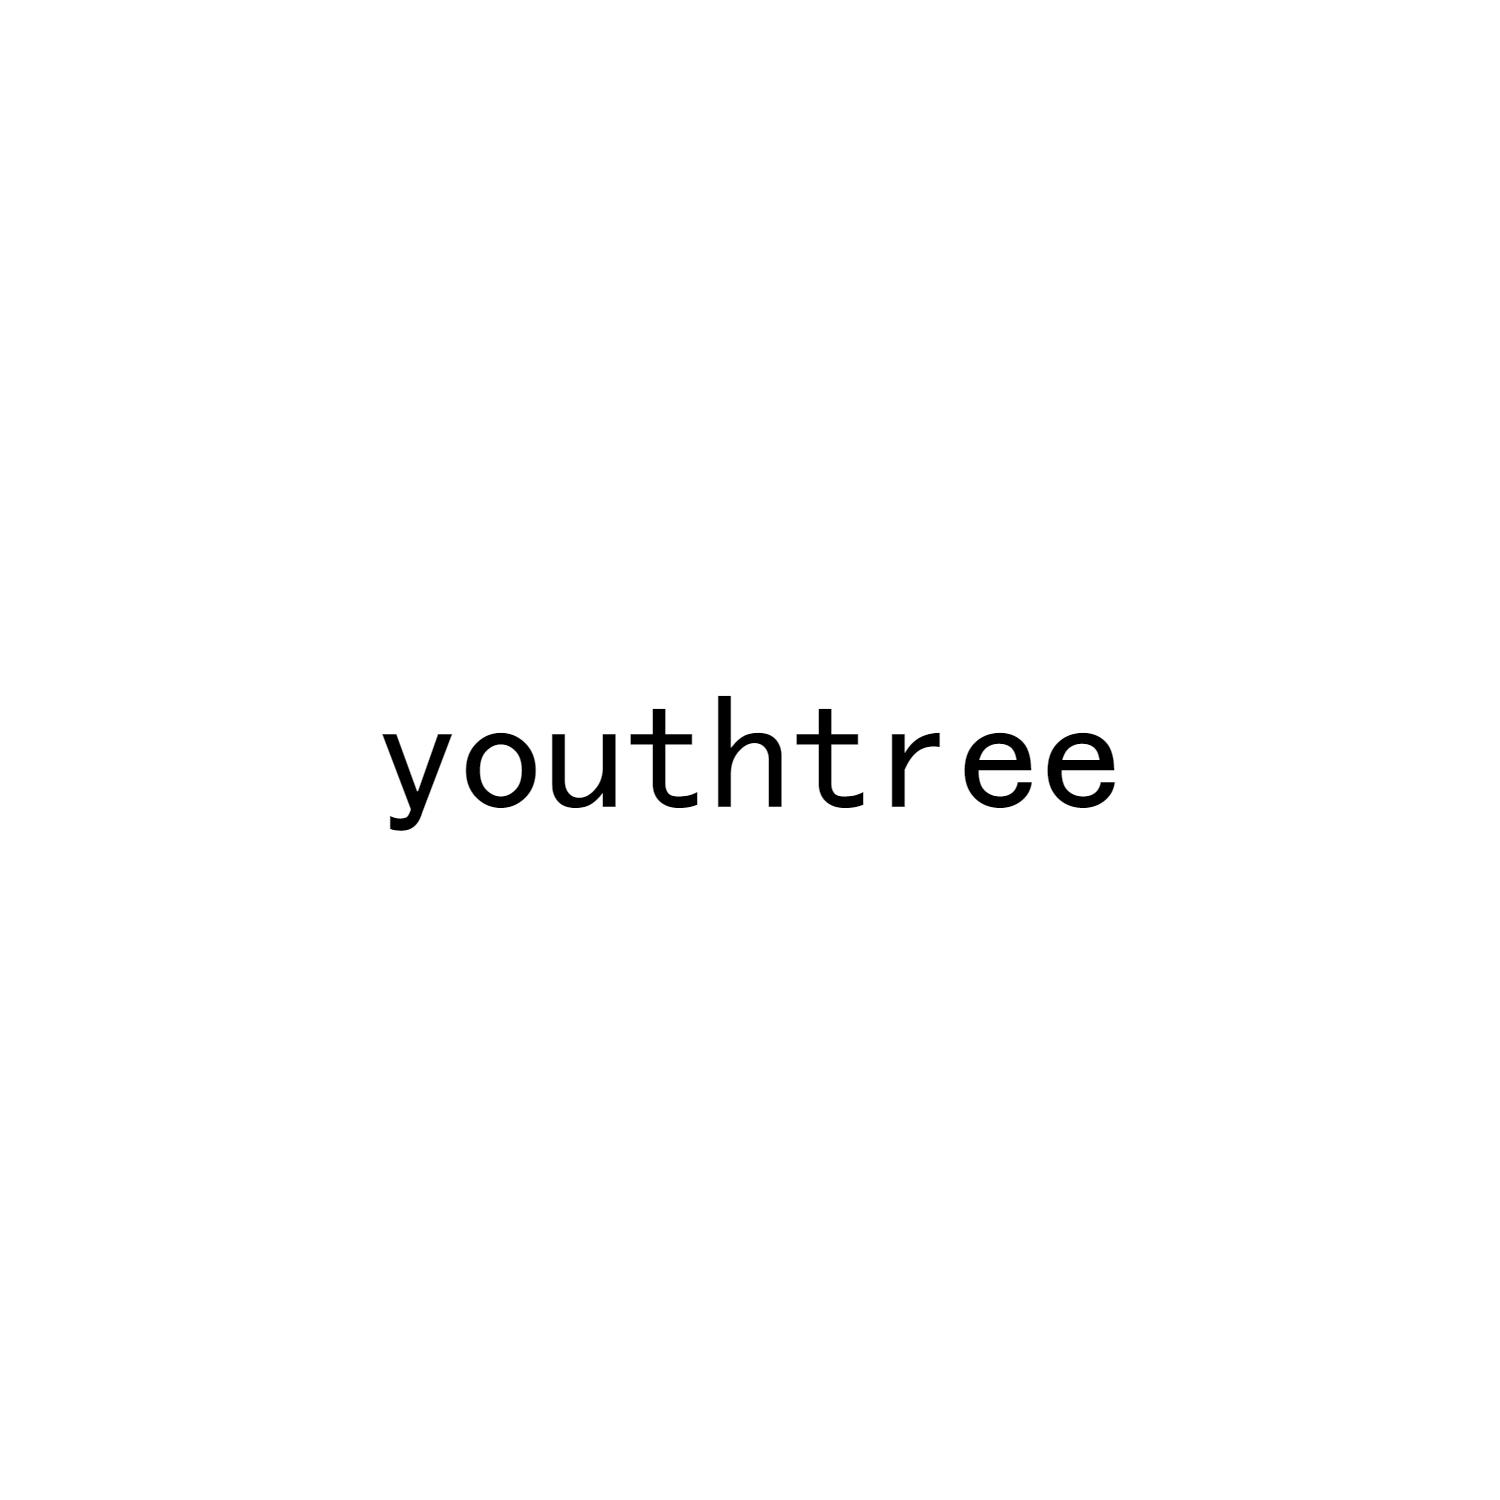 youthtree